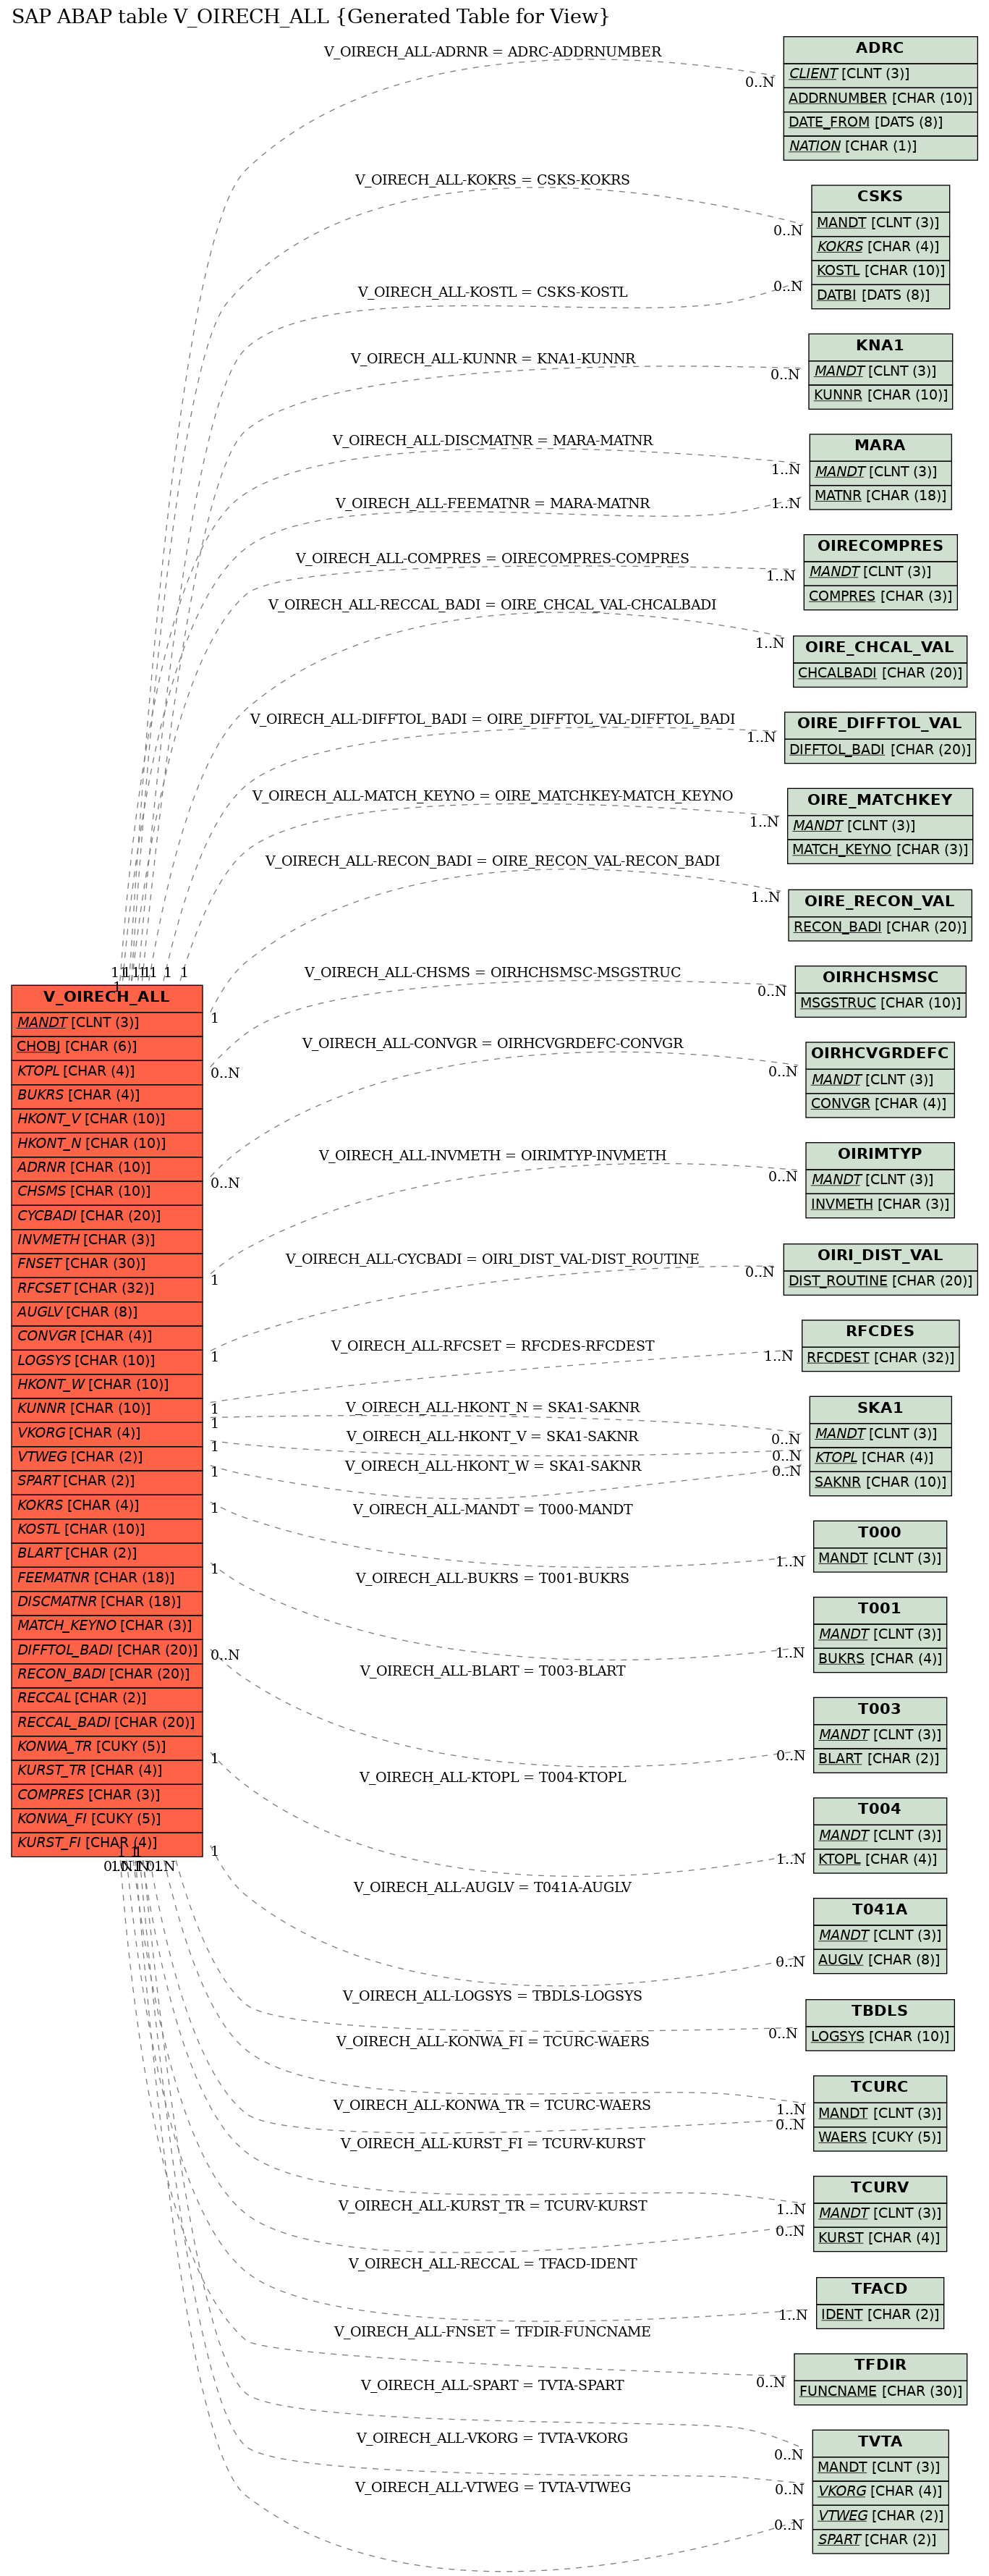 E-R Diagram for table V_OIRECH_ALL (Generated Table for View)